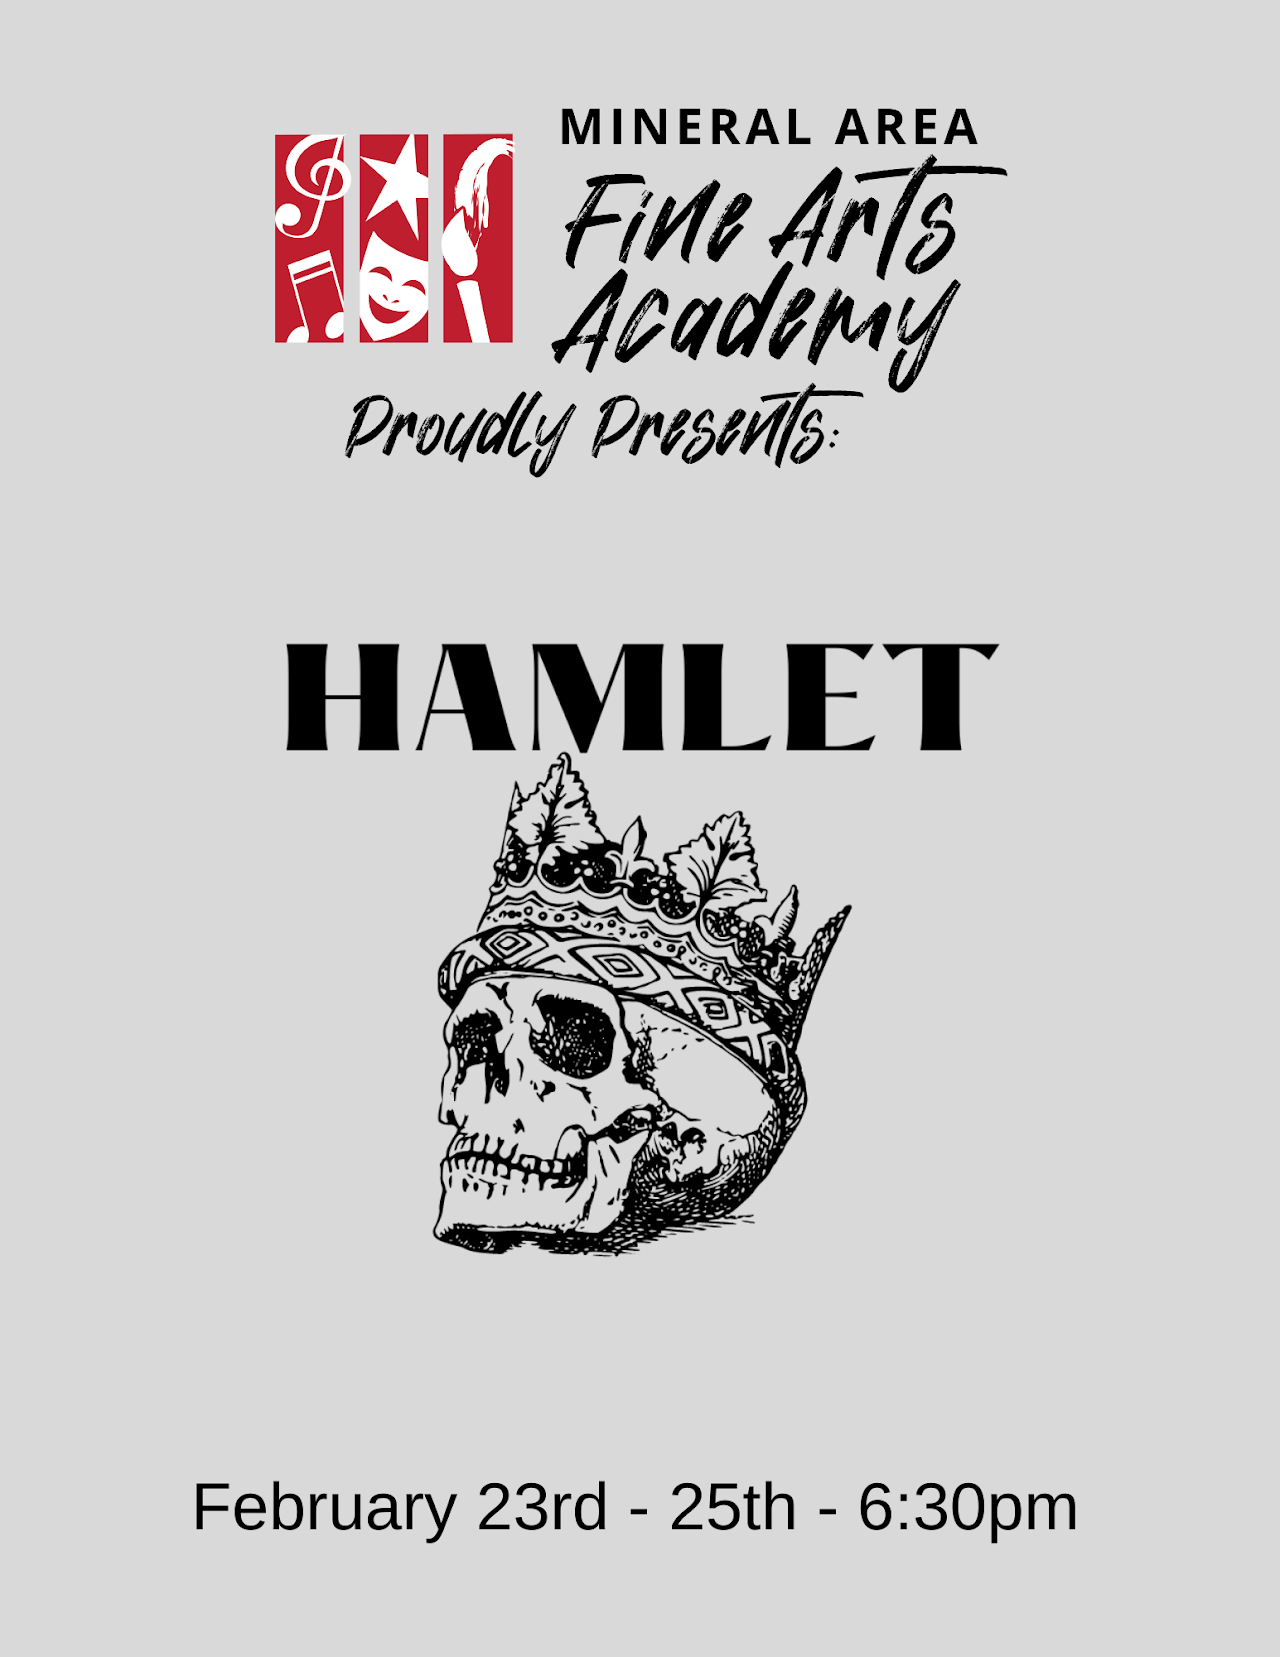 Hamlet Production In The Parkland